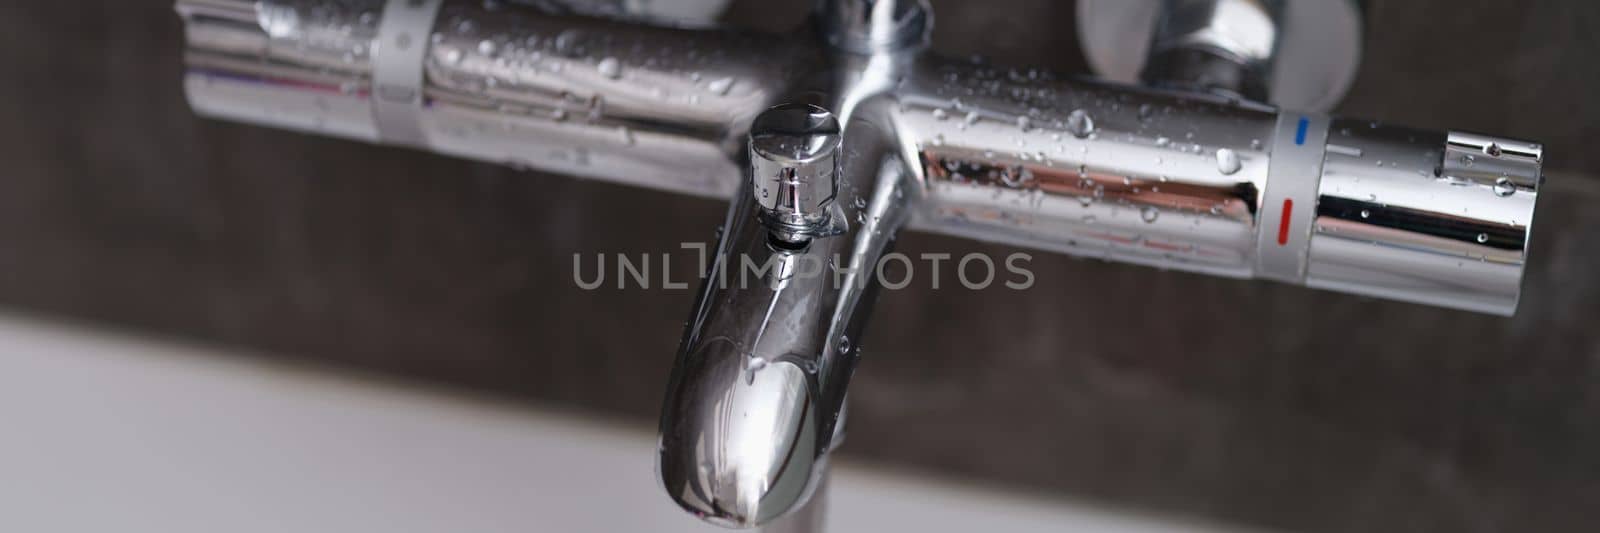 Chrome faucets on white ceramic bathtub in bathroom. Water drops on the faucet in bathroom concept